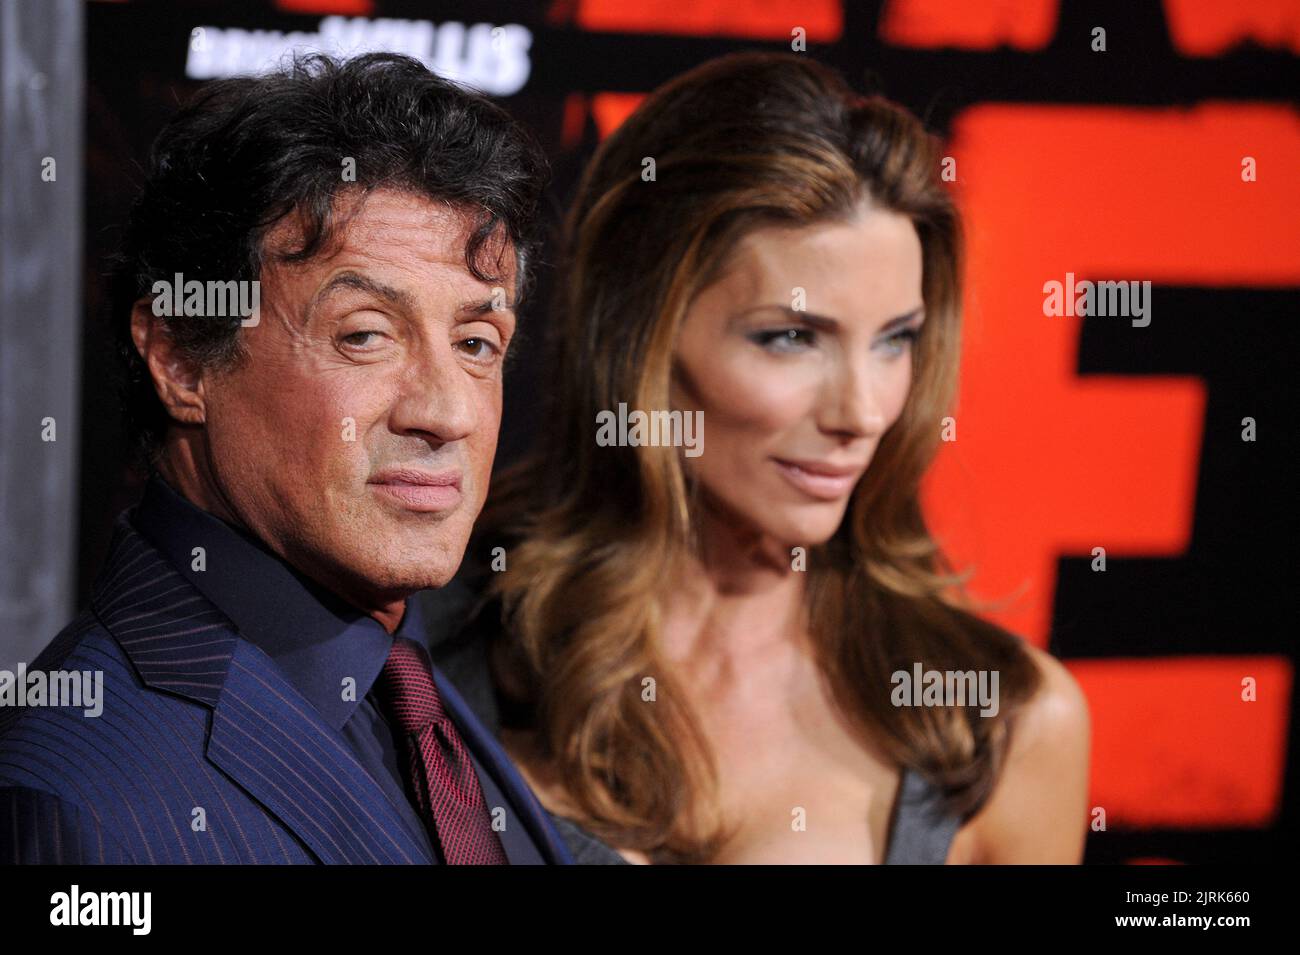 File photo dated October 11, 2010 of Sylvester Stallone attends the premiere of Red at the Mann's Chinese Theatre in Los Angeles. Sylvester Stallone and Jennifer Flavin are divorcing after 25 years of marriage. Flavin filed a petition 'for dissolution of marriage and other relief' from the Rocky actor, 76, on Friday at a court in Palm Beach County, Florida. Stallone and Flavin, 54, married in 1997, though their relationship originally began in 1988 at a restaurant in Beverly Hills, California. Photo by Lionel Hahn/ABACAPRESS.COM Stock Photo